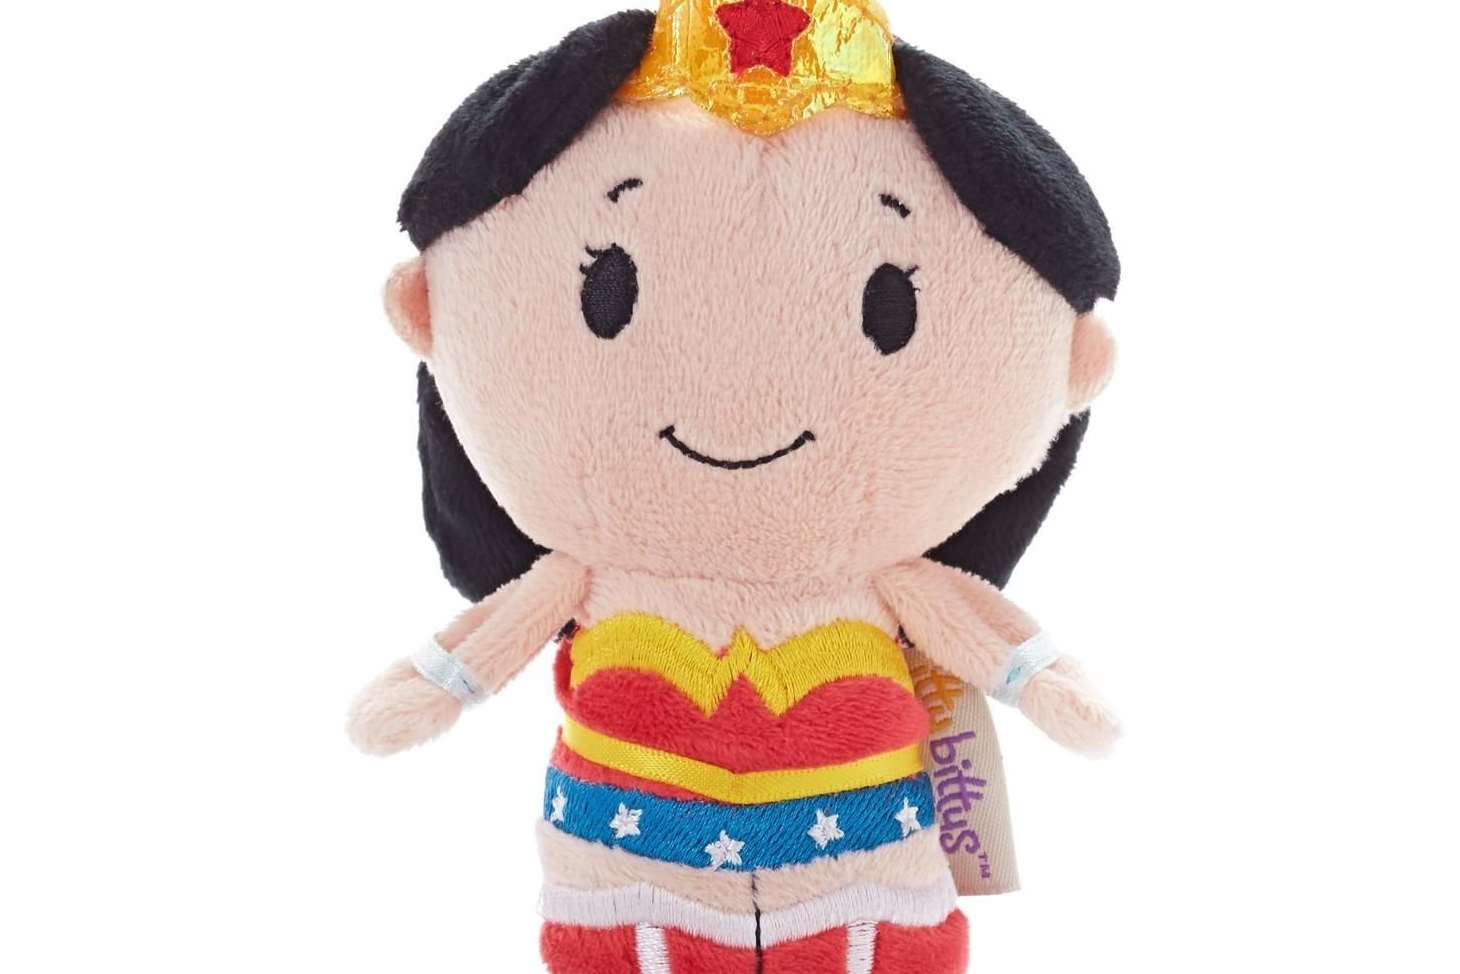 Show your mum you believe she's Wonder Woman with this Hallmark gift.